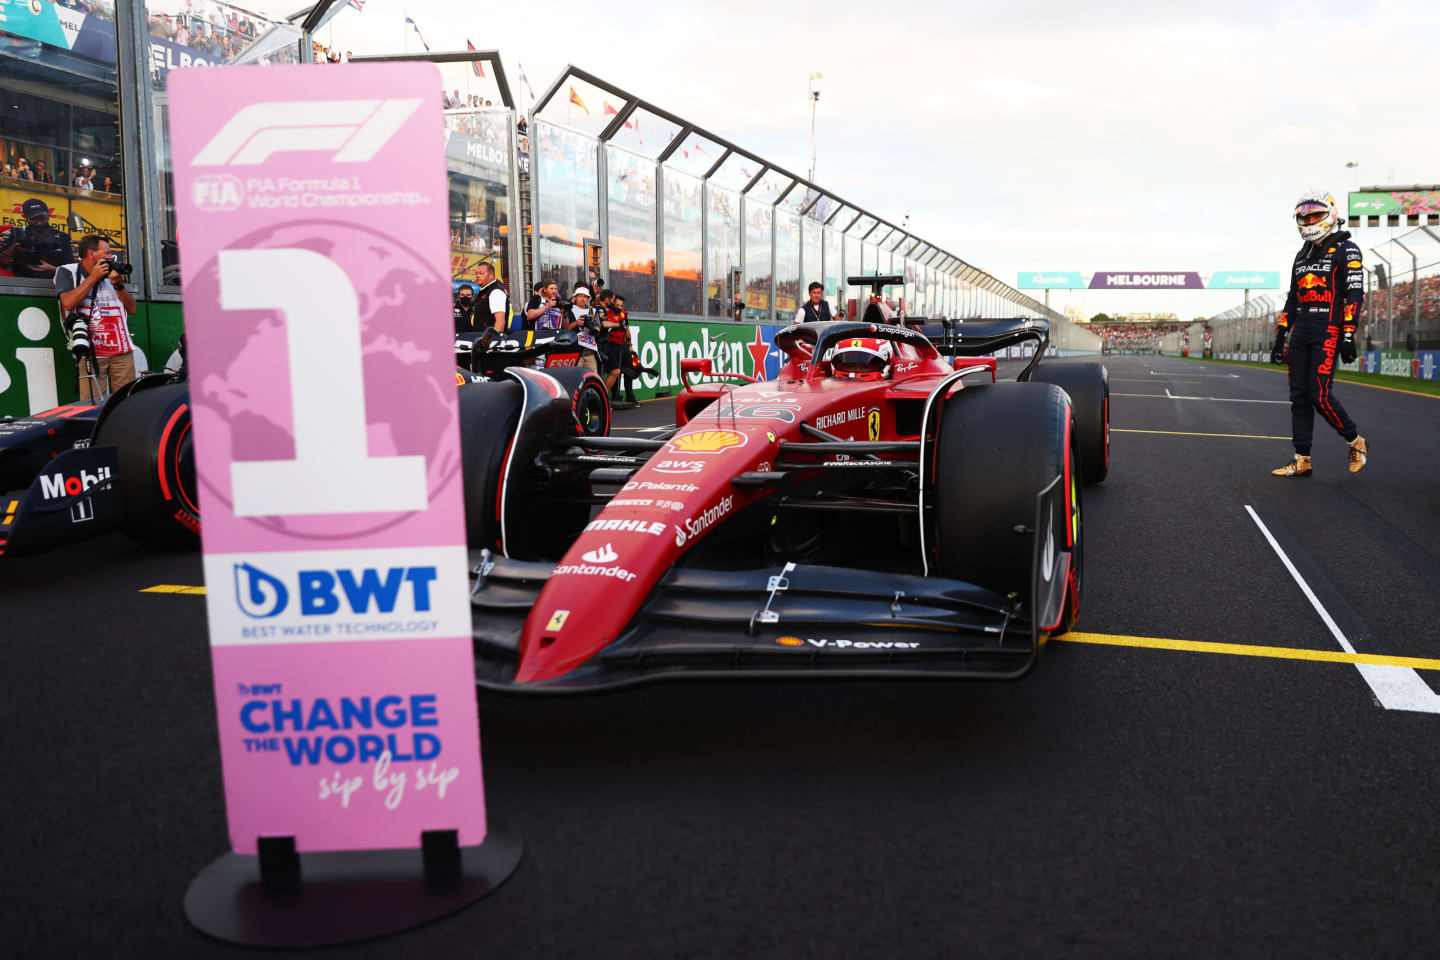 MELBOURNE, AUSTRALIA - APRIL 09: Pole position qualifier Charles Leclerc of Monaco and Ferrari stops in parc ferme during qualifying ahead of the F1 Grand Prix of Australia at Melbourne Grand Prix Circuit on April 09, 2022 in Melbourne, Australia. (Photo by Dan Istitene - Formula 1/Formula 1 via Getty Images)